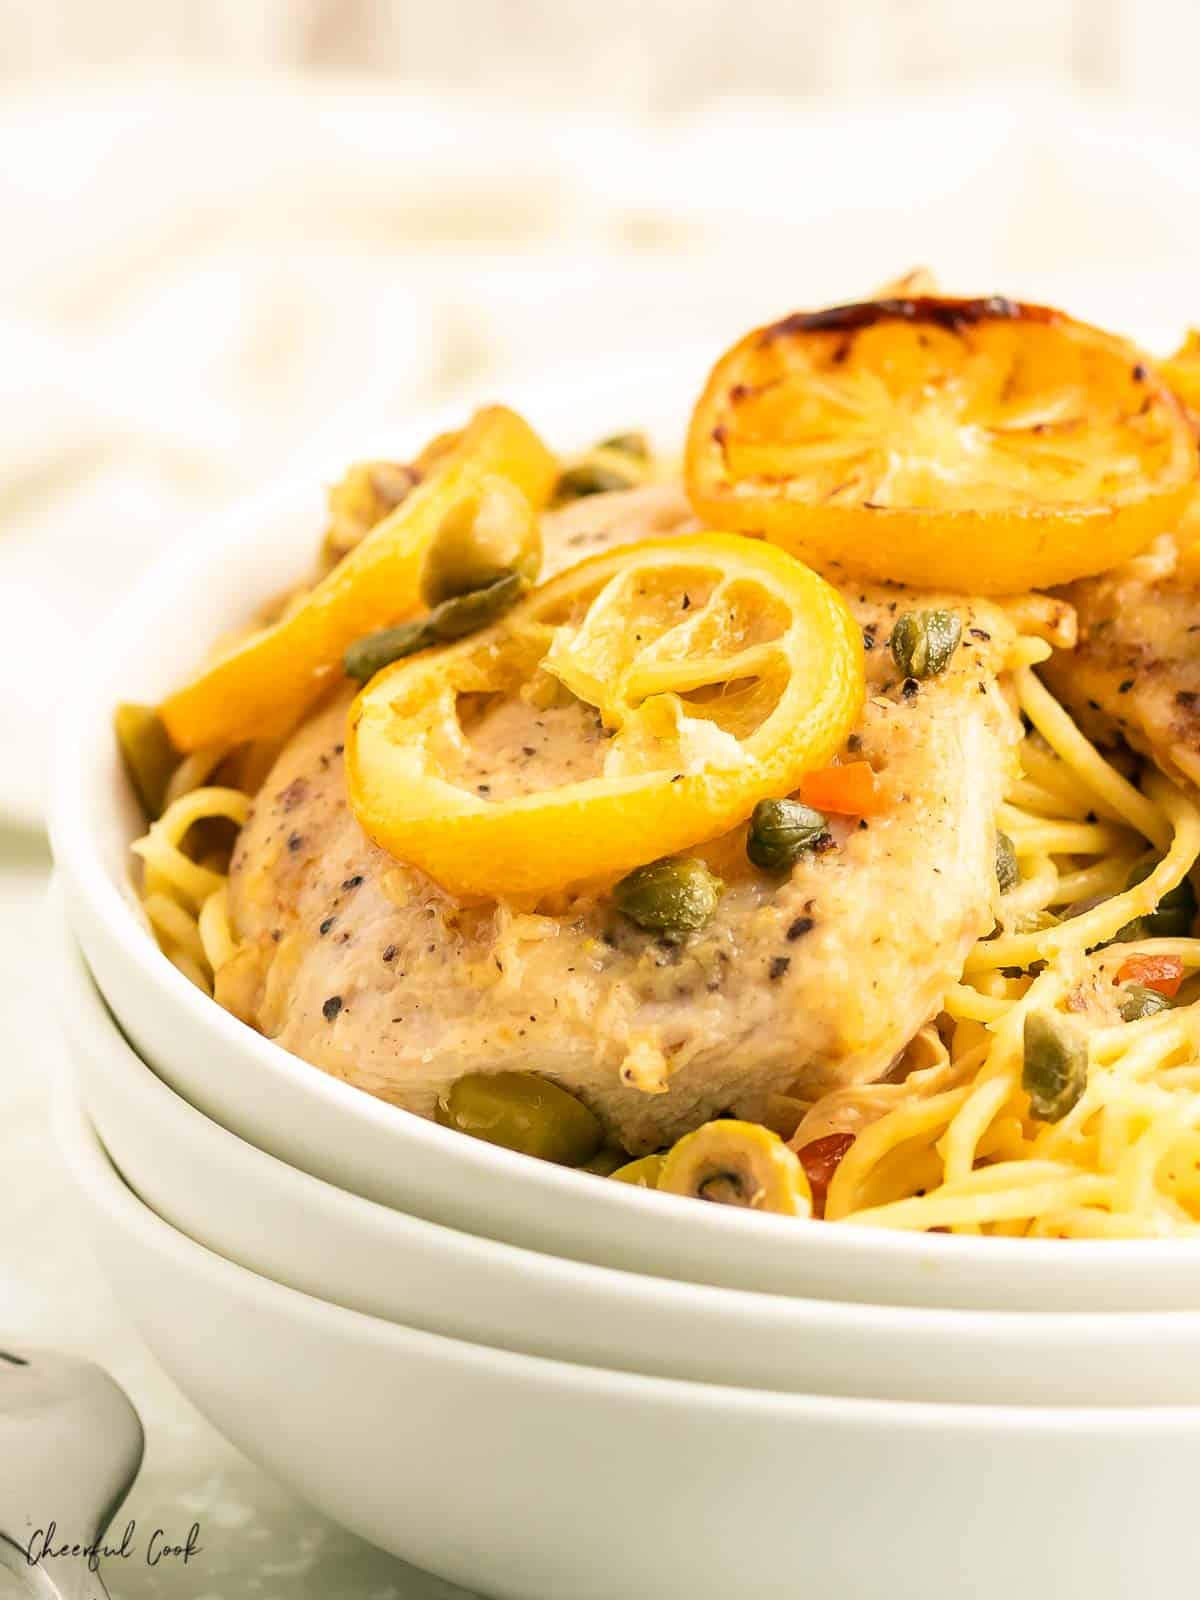 Lemon Chicken in a caper, olive butter sauce topped over spaghetti pasta in a white bowl